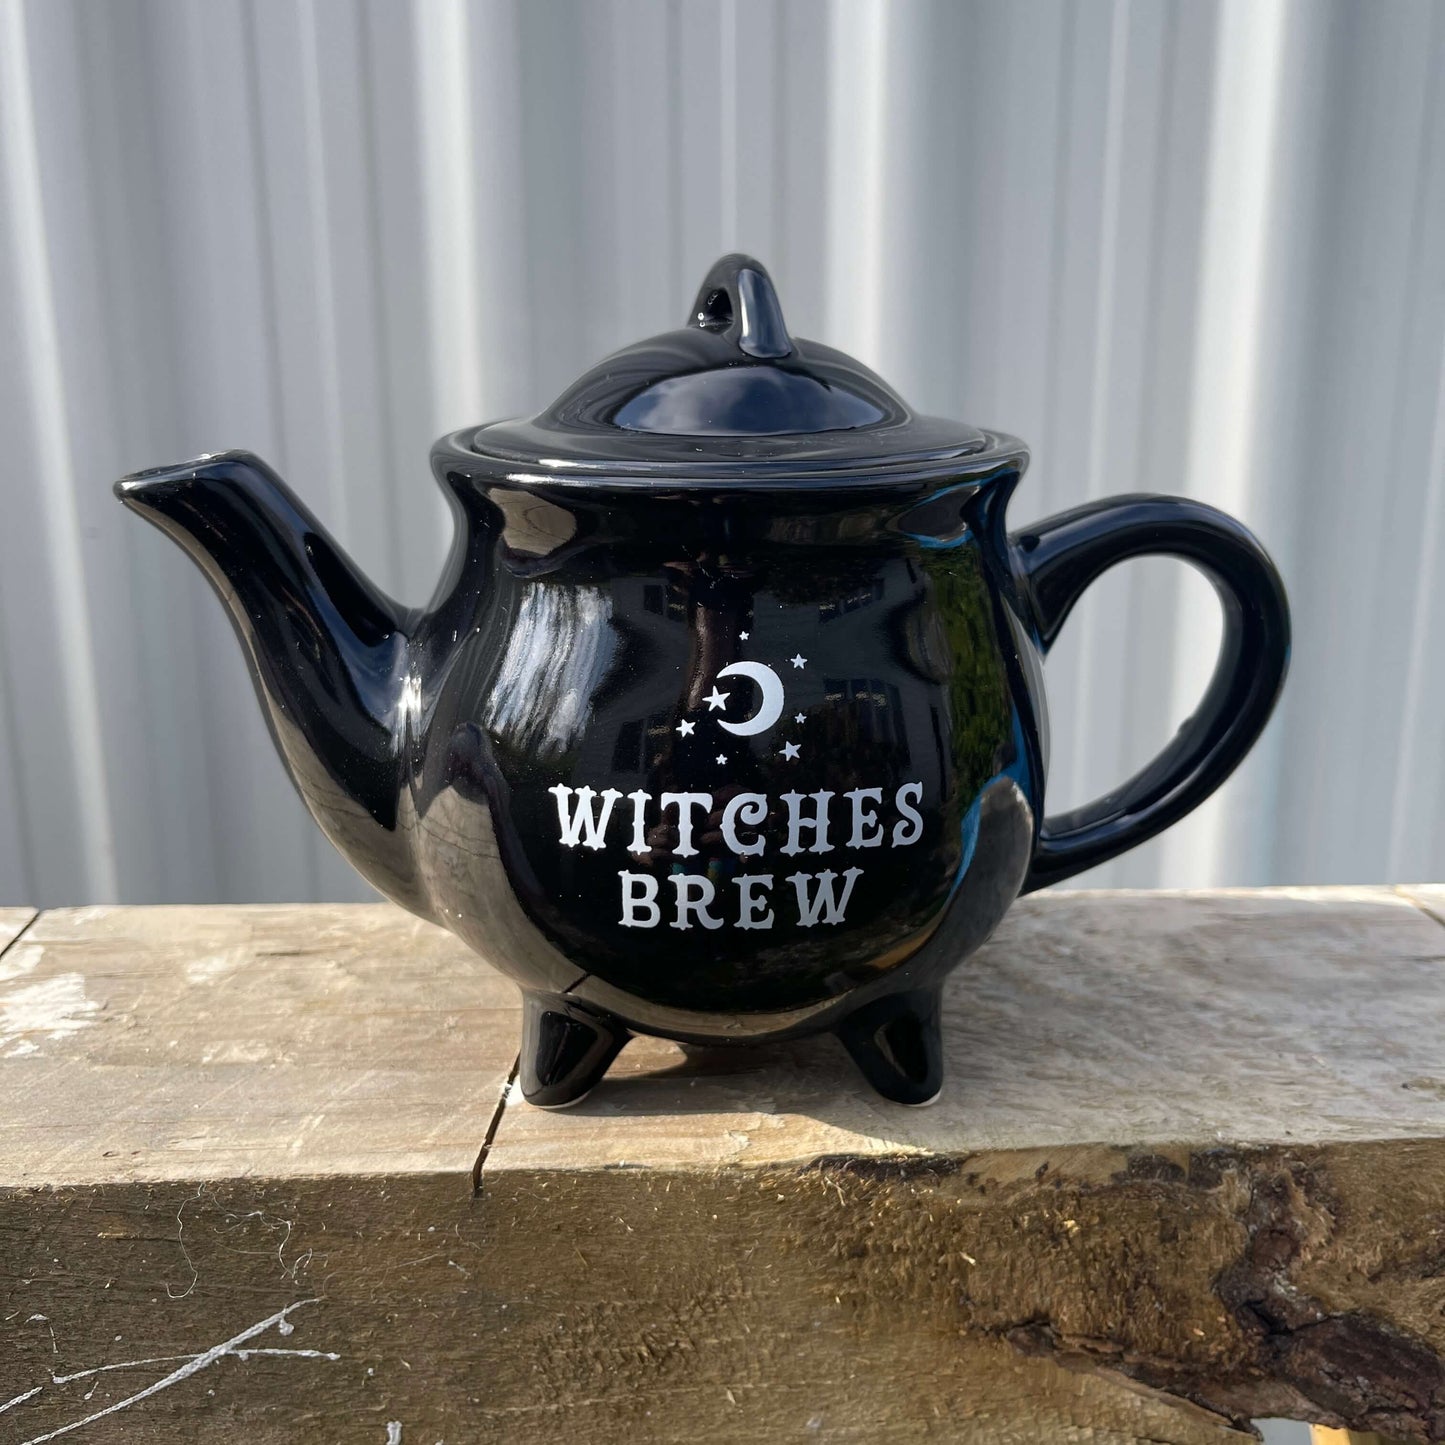 Black teapot with Witches Brew written on it in white.